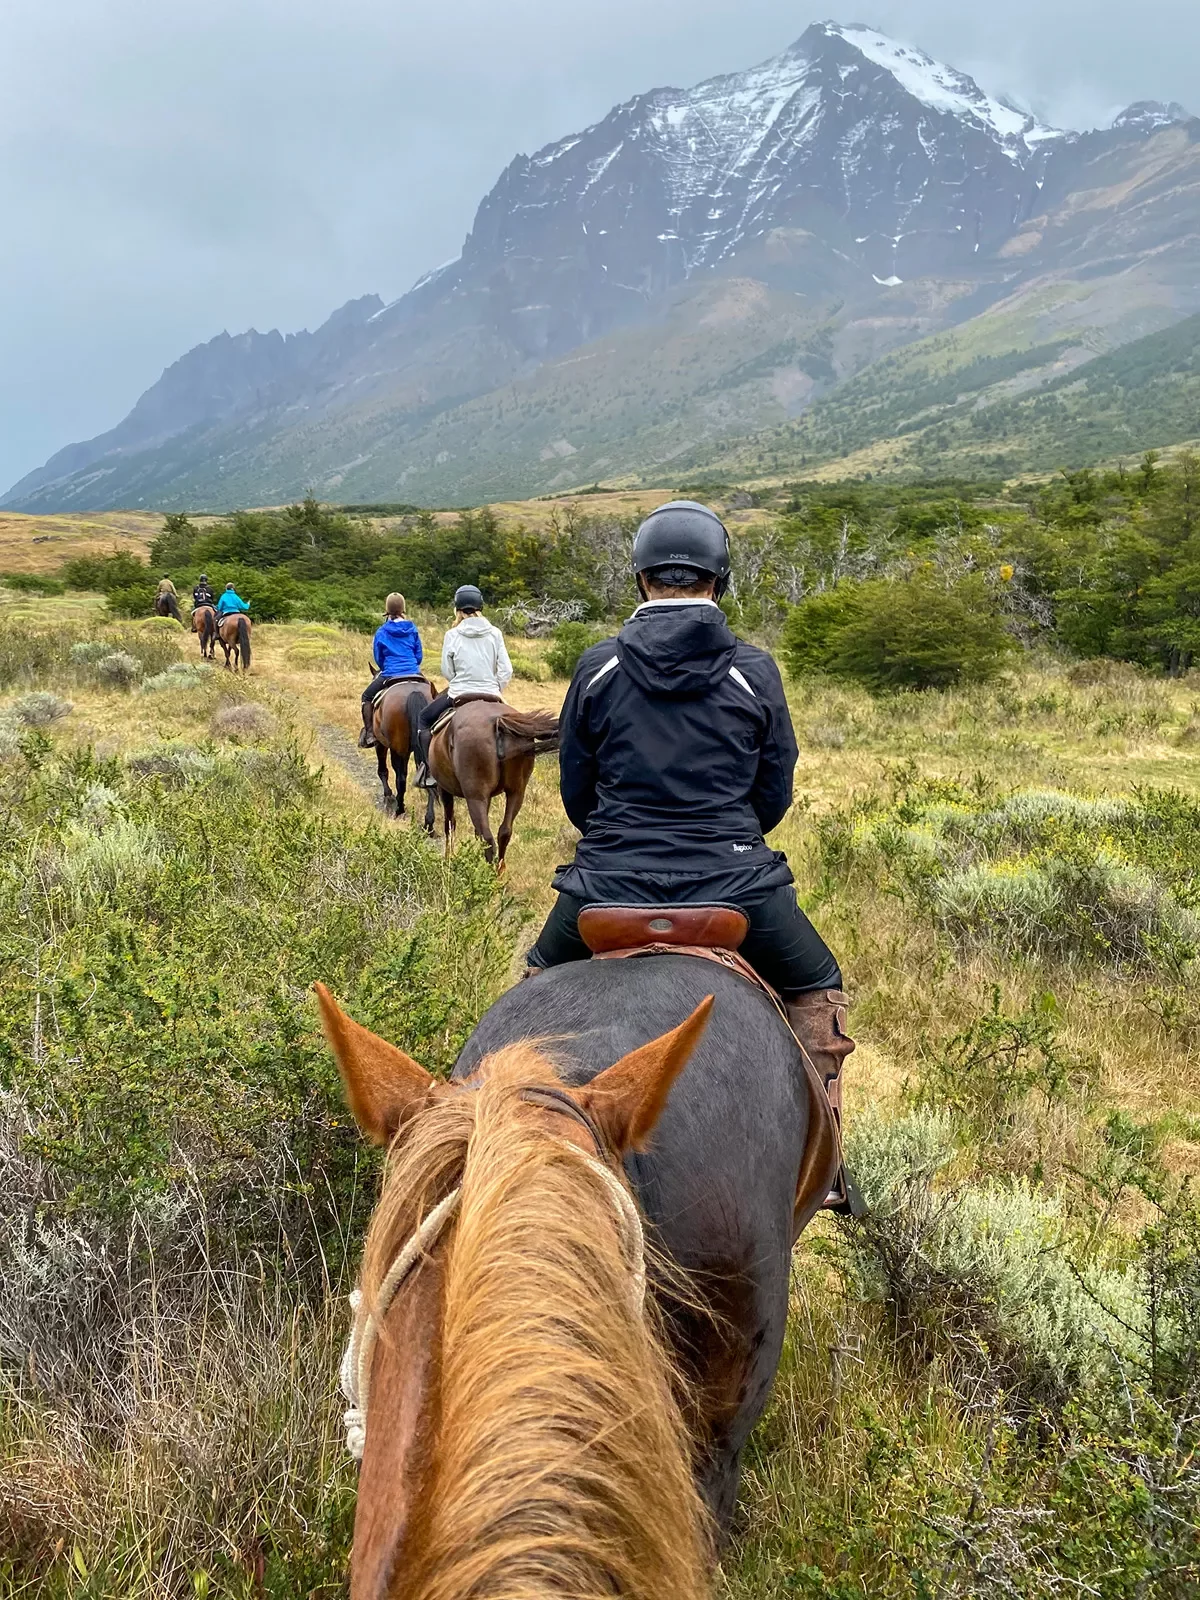 Point of view shot of guests on horseback, heading towards ring of mountains.